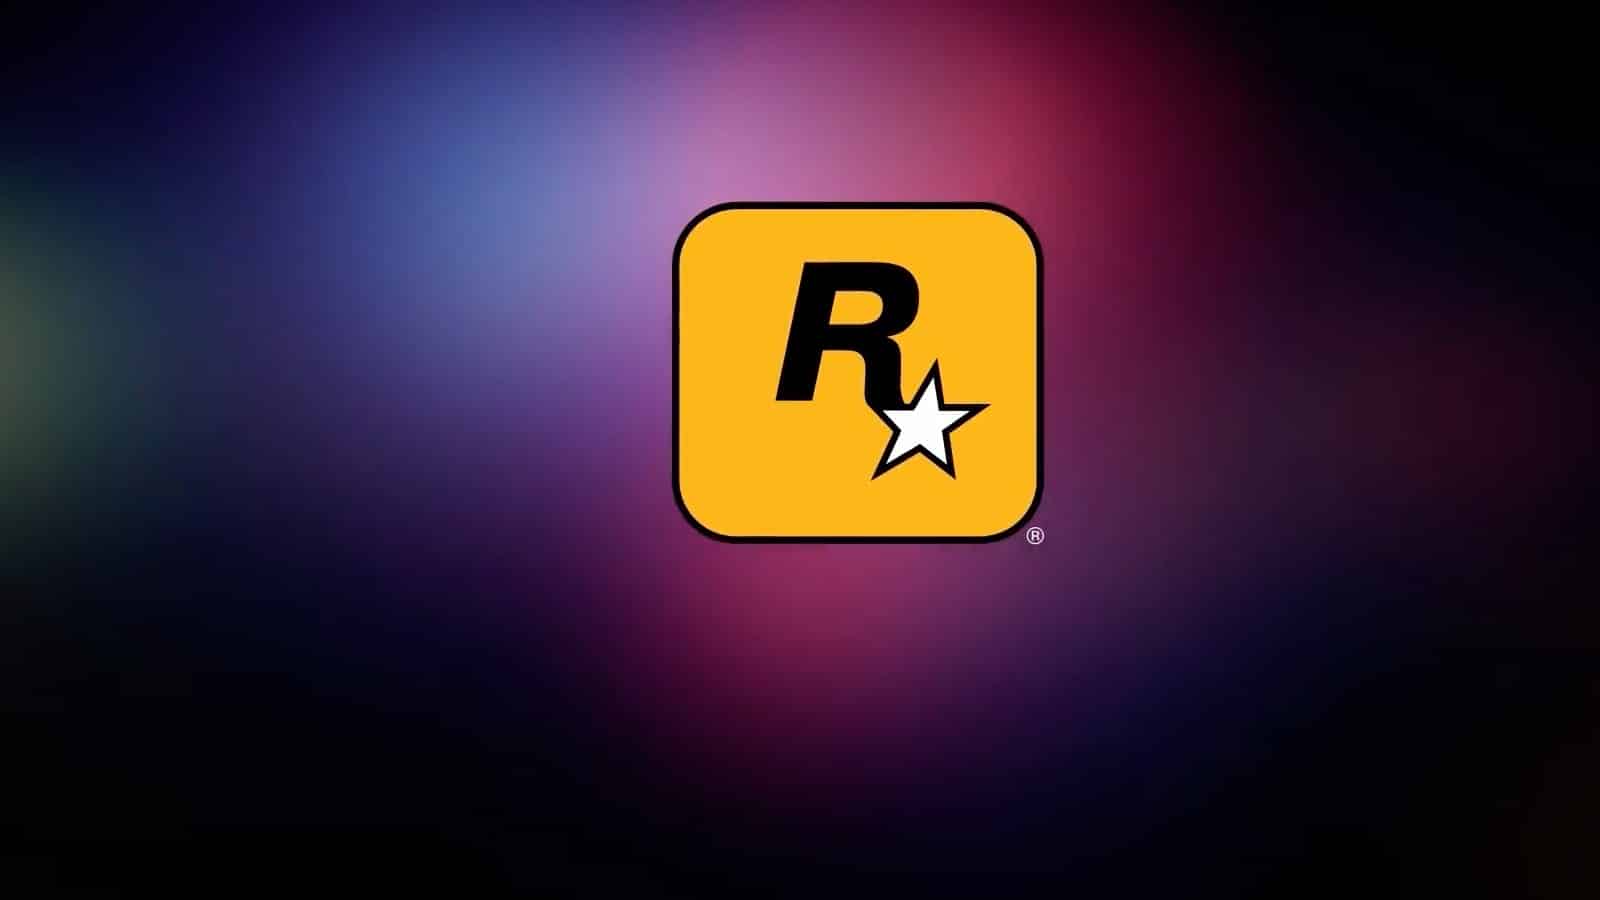 The Rockstar logo as it appears in Grand Theft Auto 5